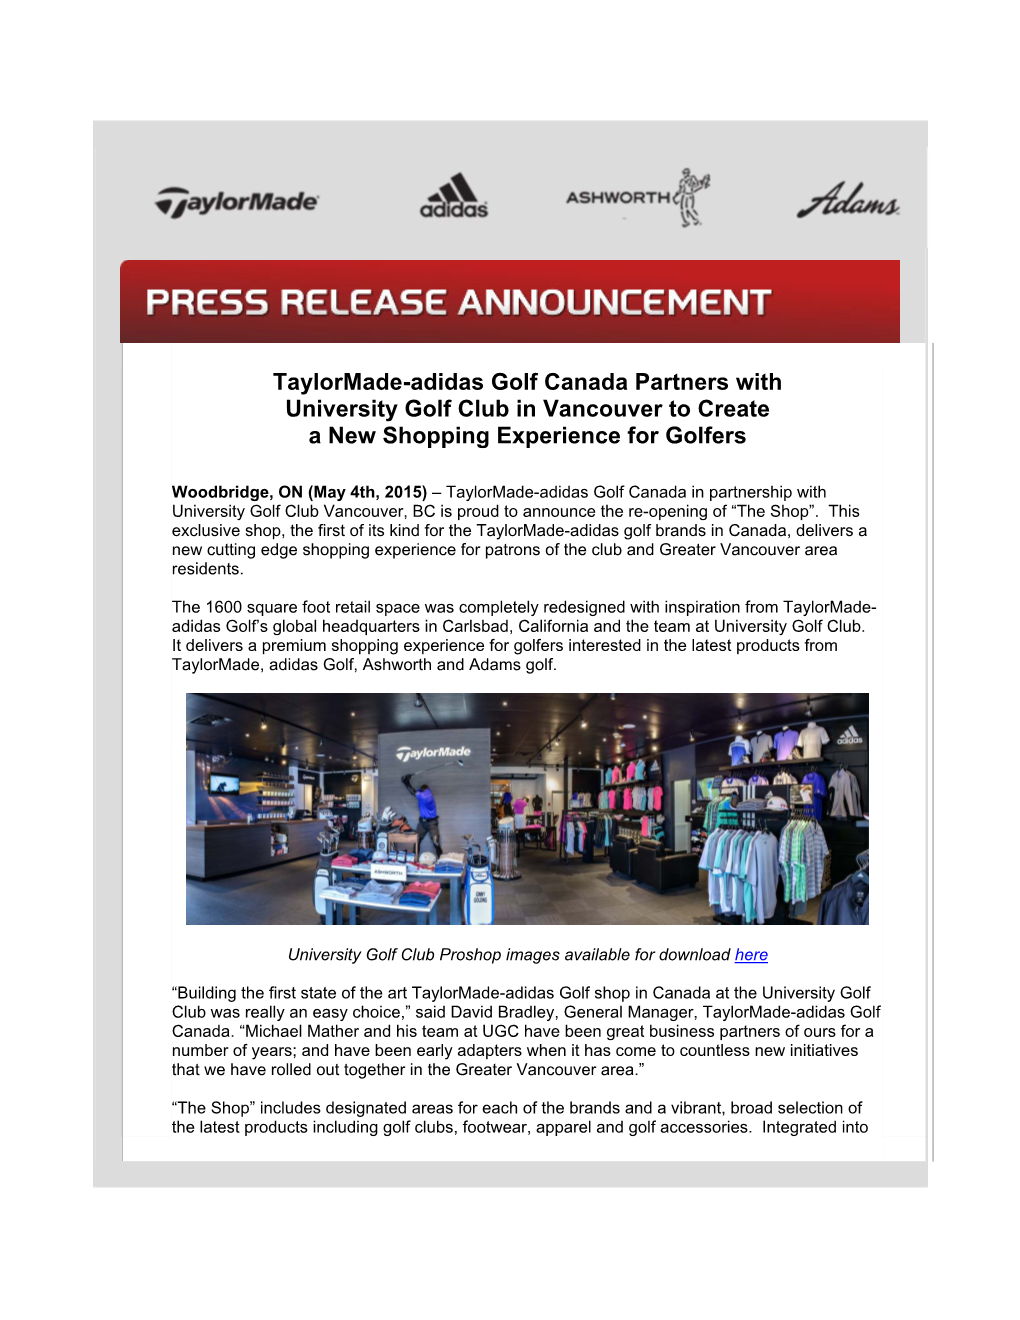 Taylormade-Adidas Golf Canada Partners with University Golf Club in Vancouver to Create a New Shopping Experience for Golfers